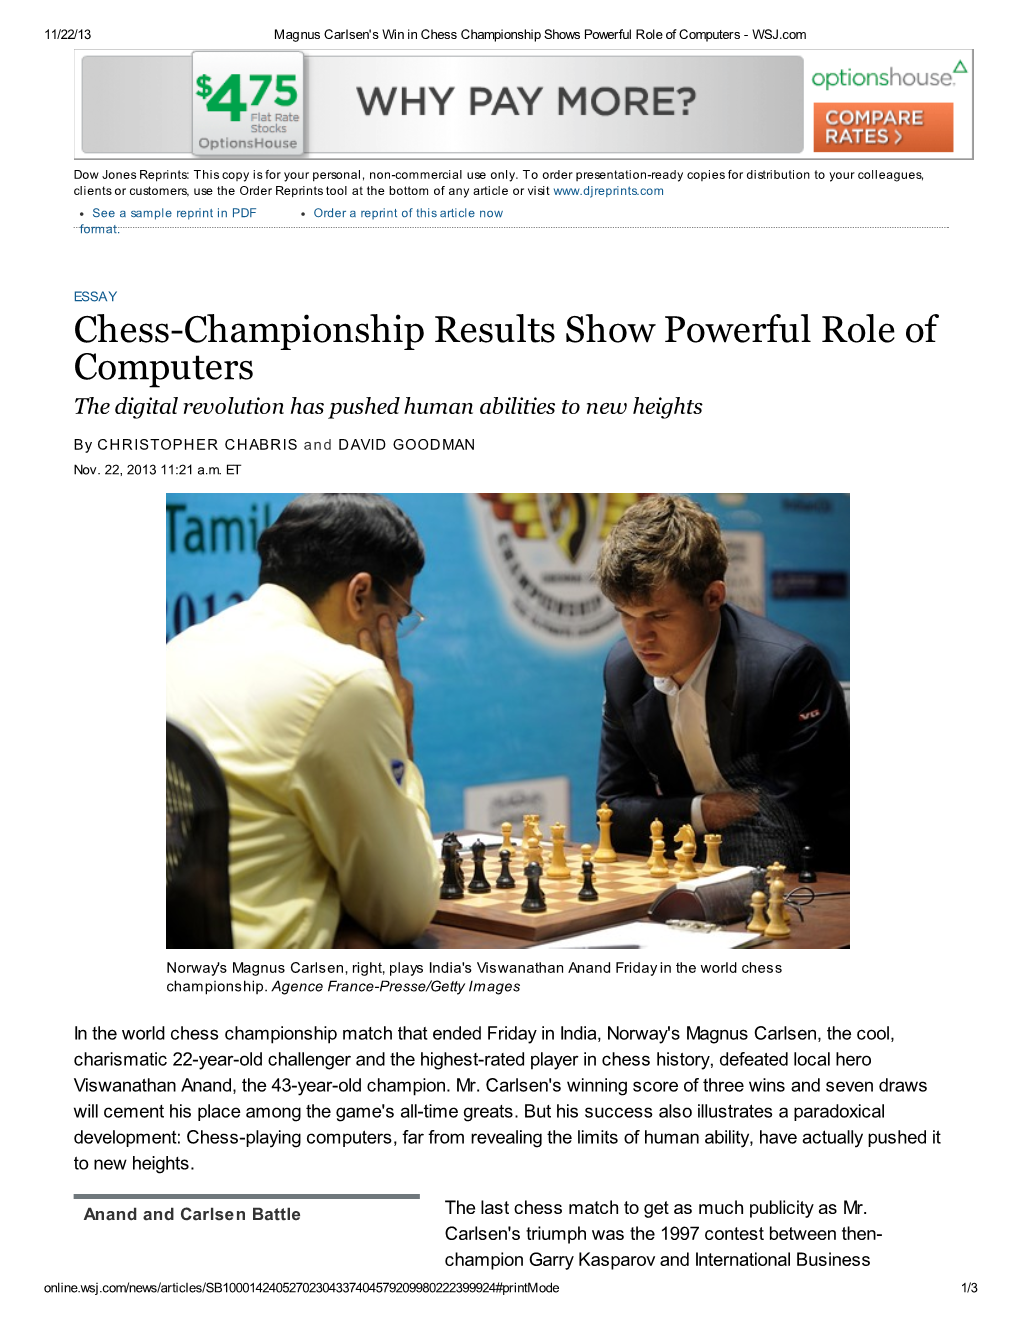 Chess-Championship Results Show Powerful Role of Computers the Digital Revolution Has Pushed Human Abilities to New Heights